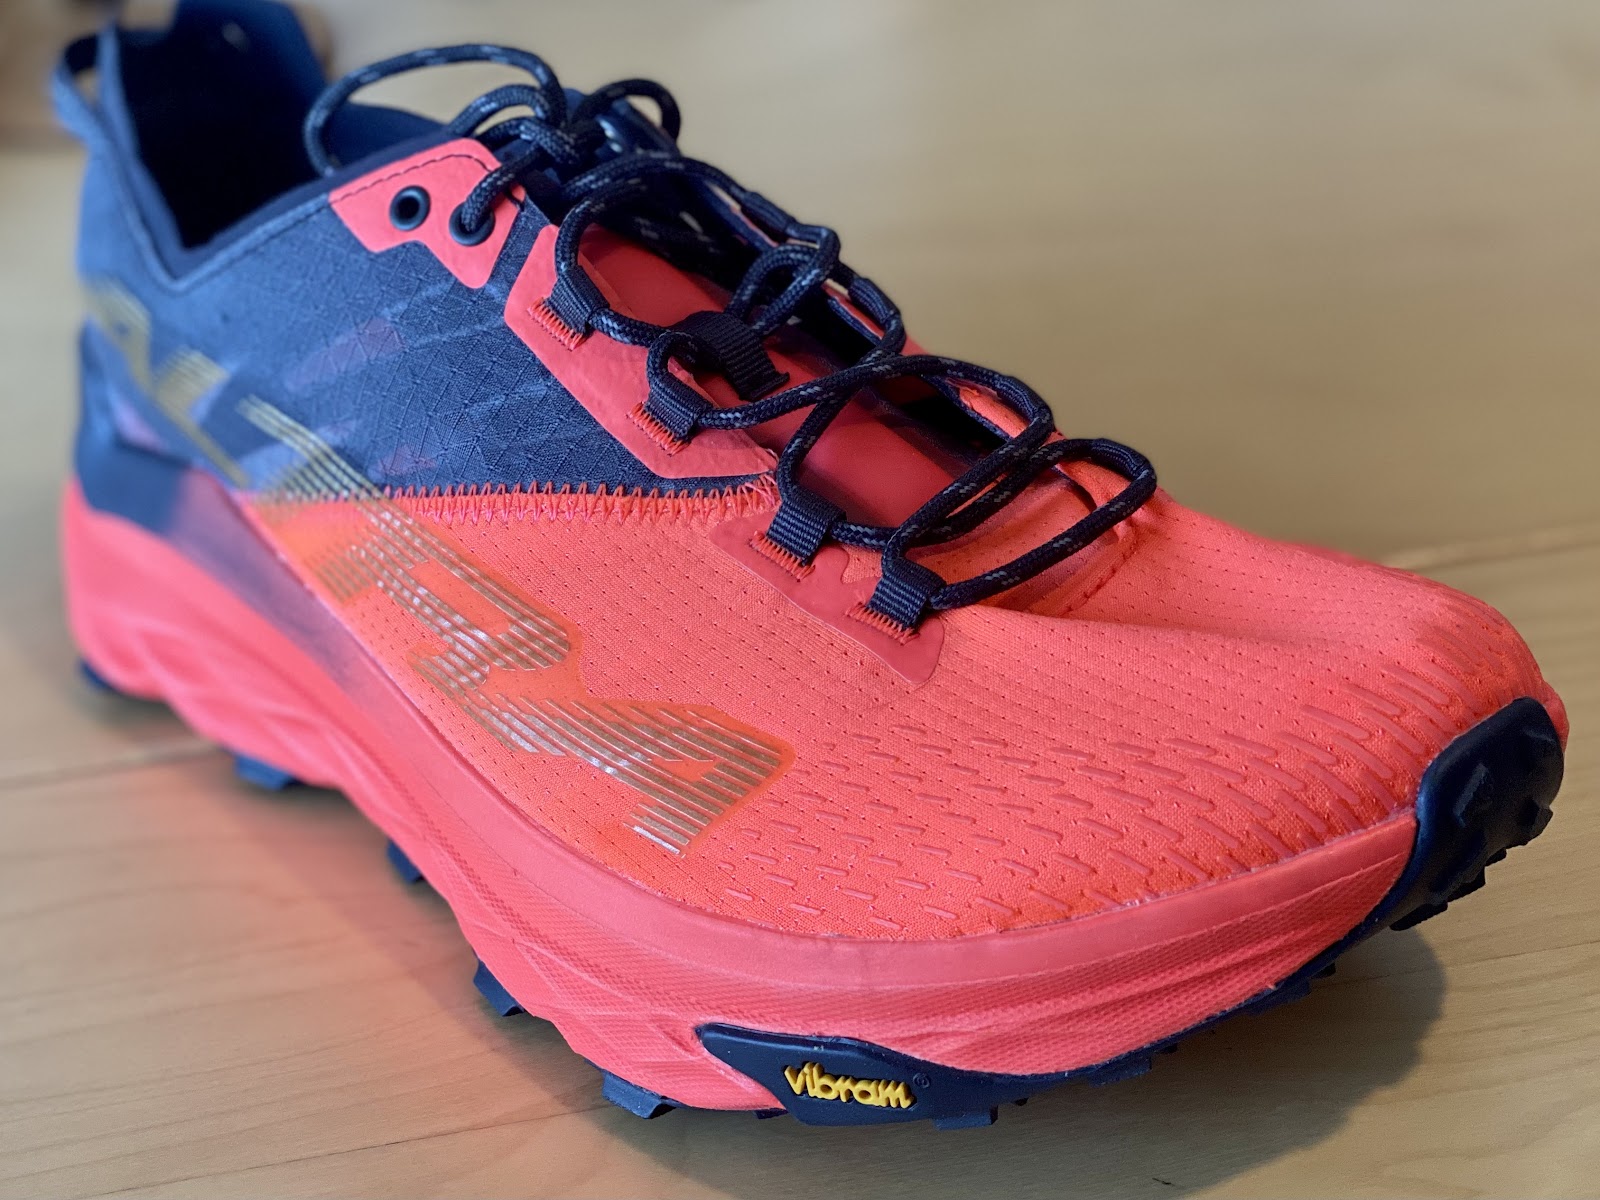 Altra Mont Blanc BOA - Test and Review - Ultra Runner Mag